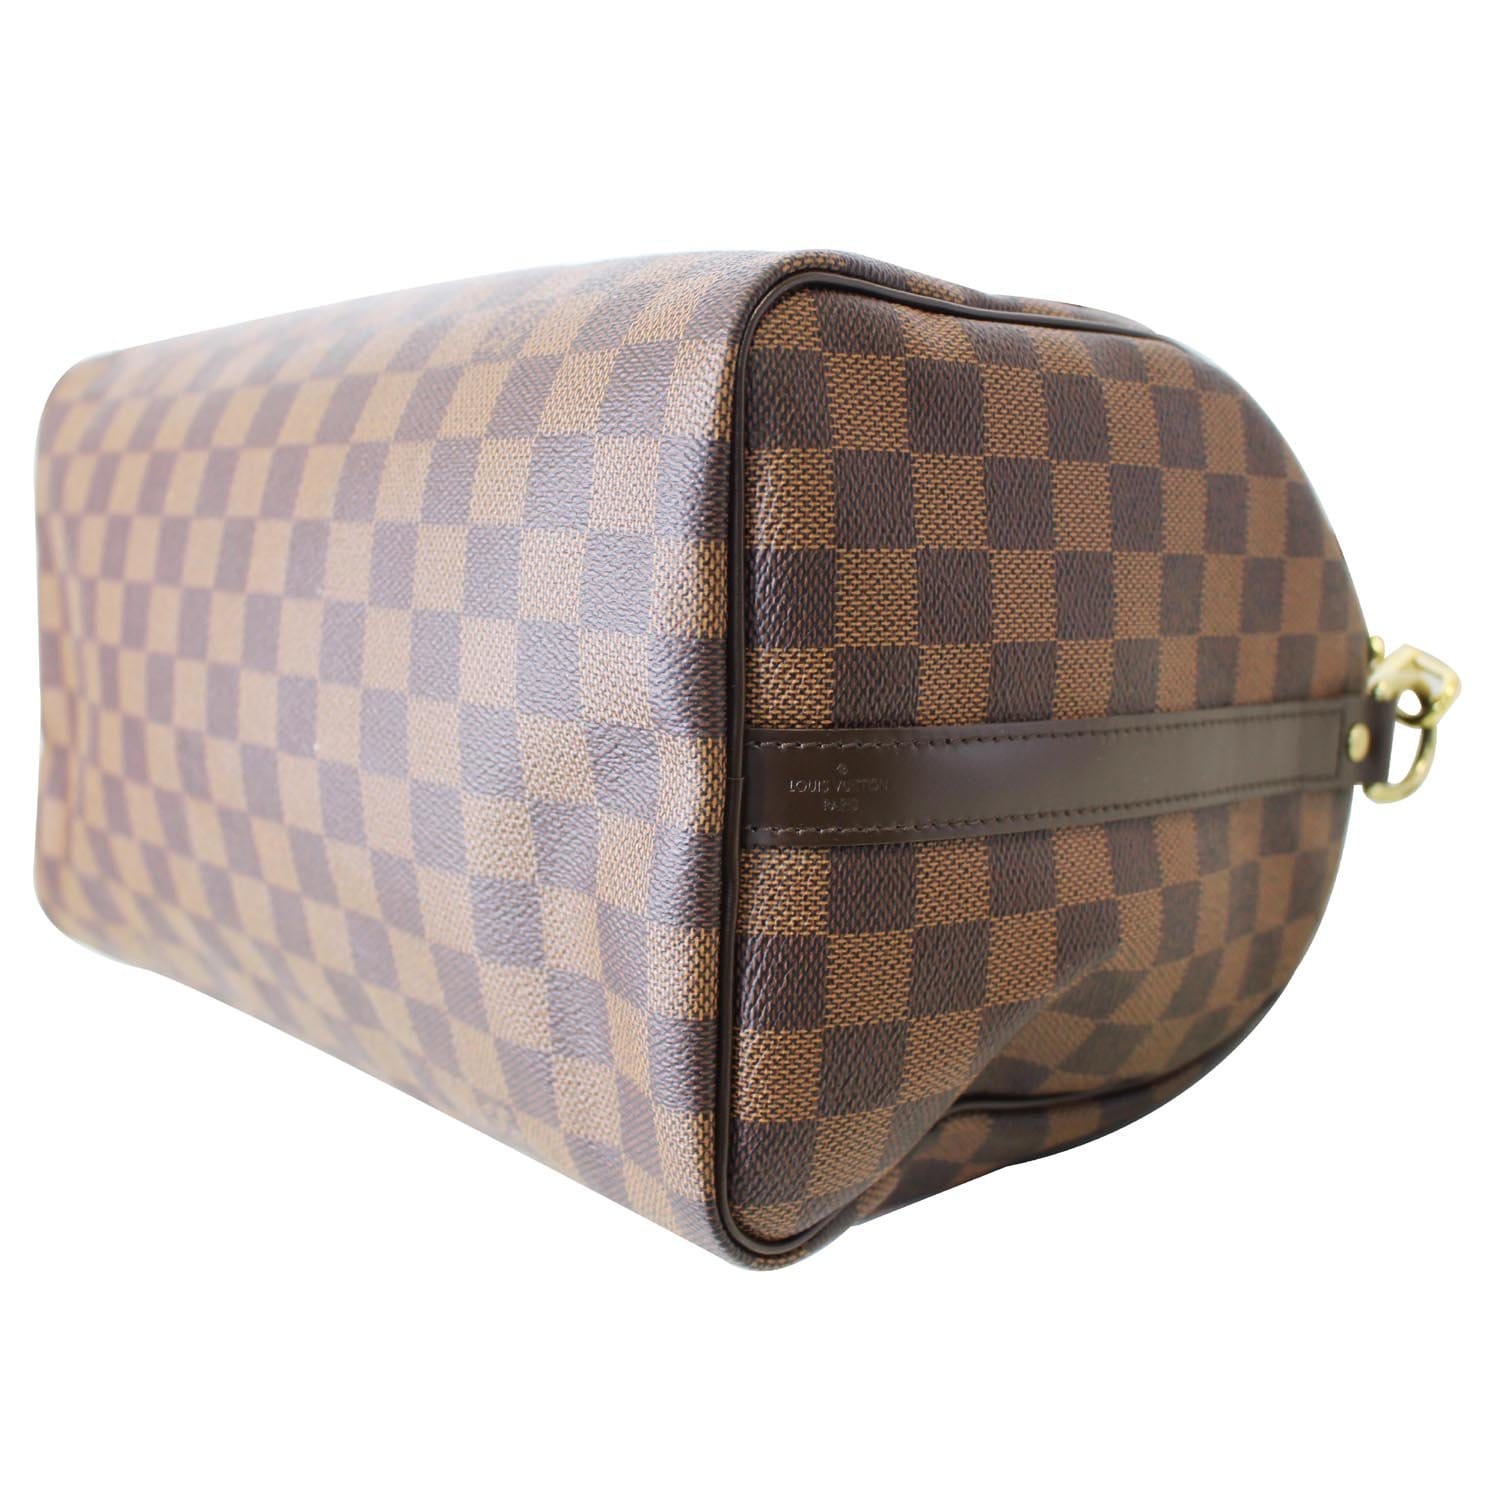 LOUIS VUITTON, PATCHES SPEEDY 30 BANDOULIERE OF DAMIER EBENE CANVAS WITH  POLISHED BRASS HARDWARE, Handbags & Accessories, 2020